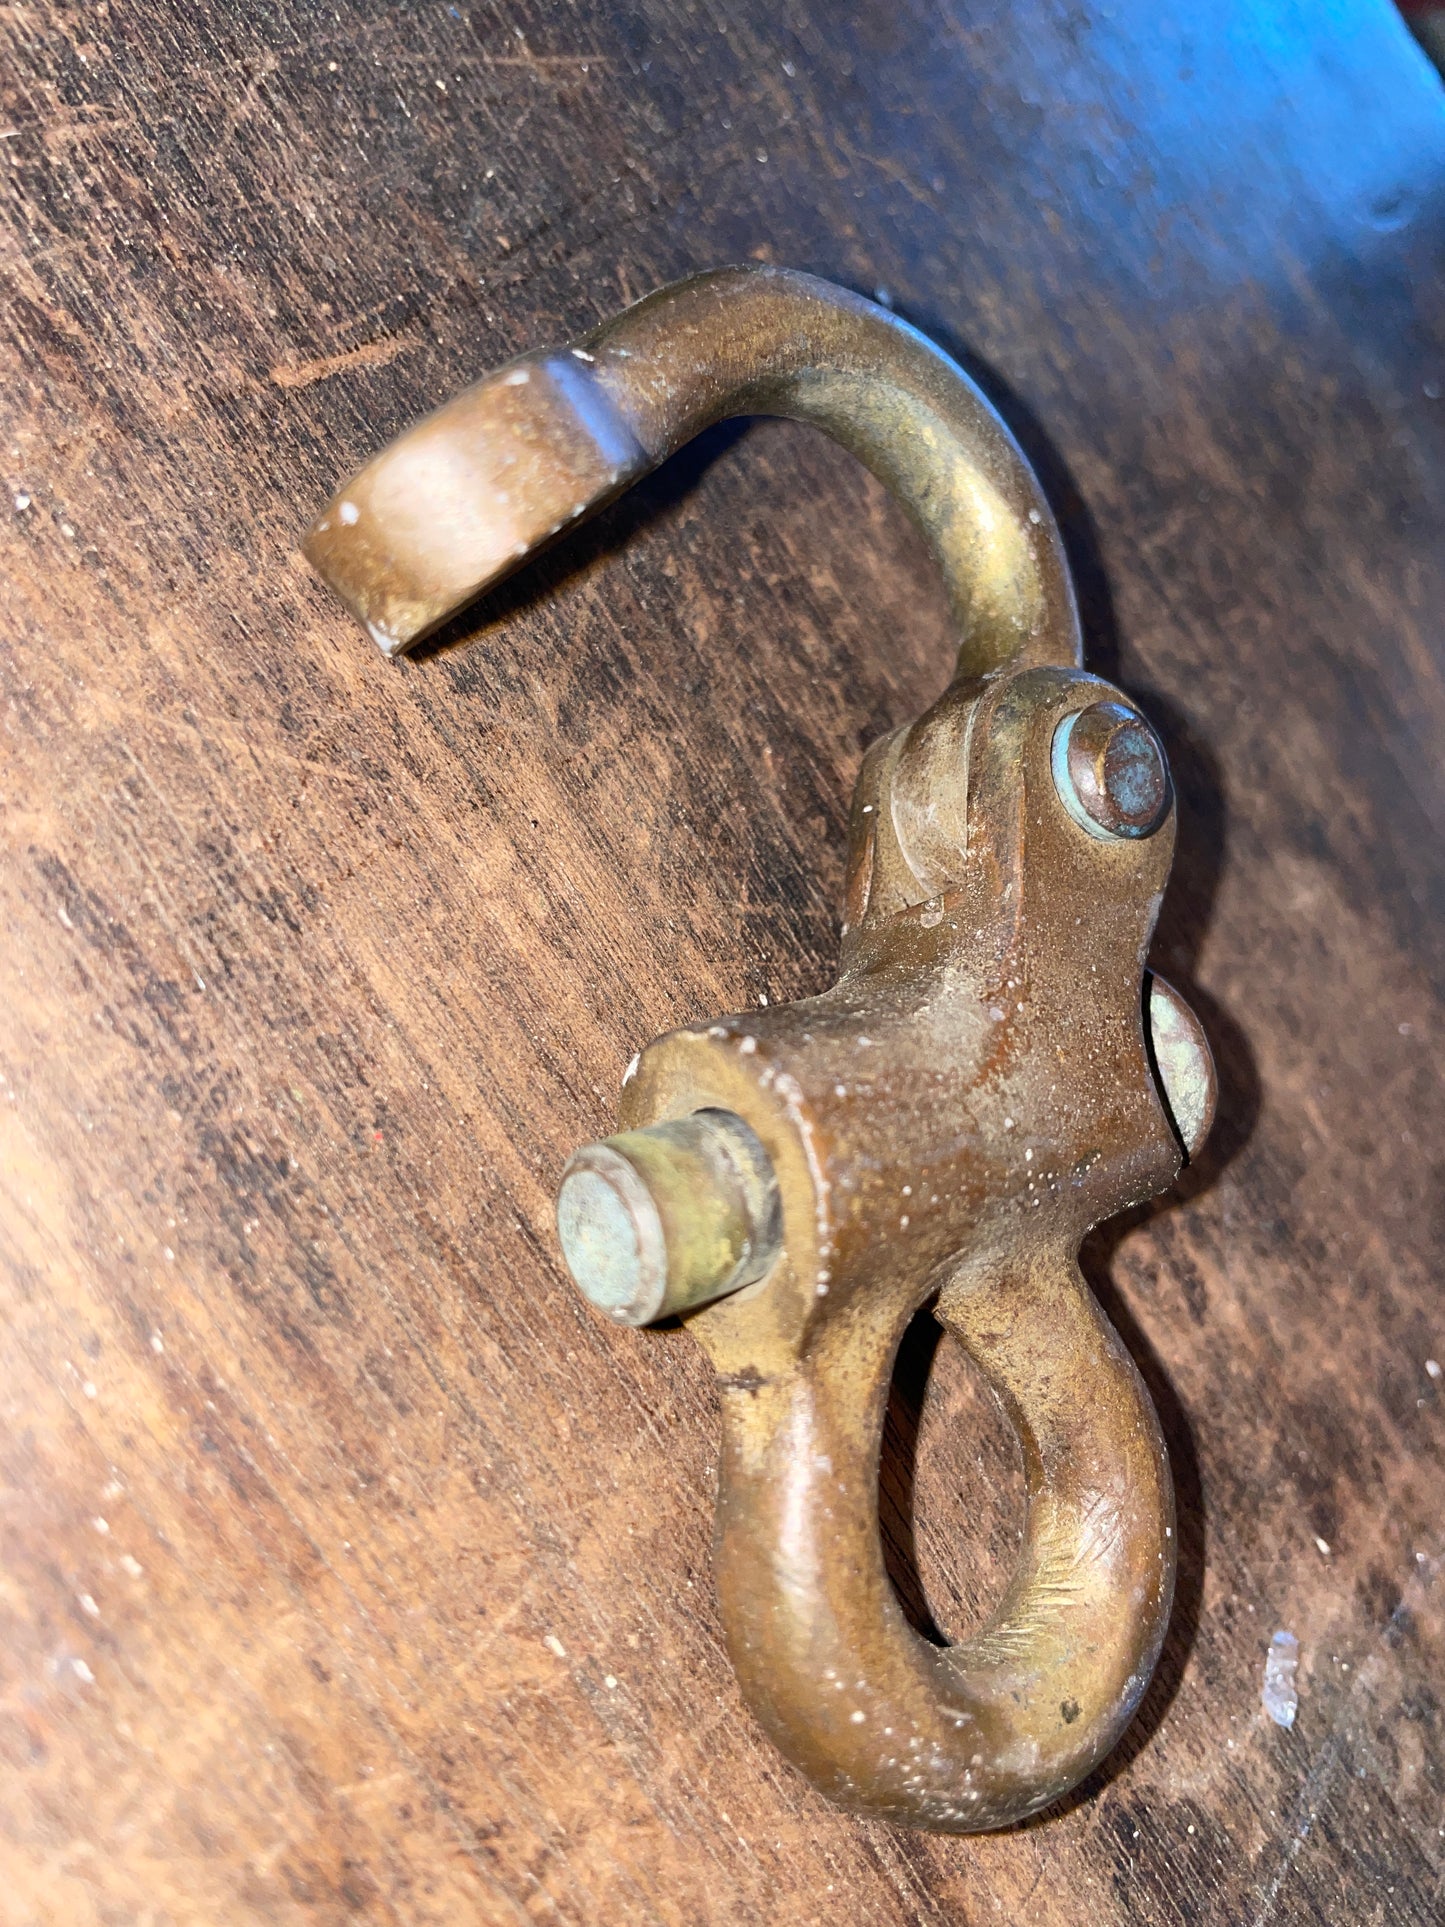 Solid Bronze Fixed Shackle- 9/16”